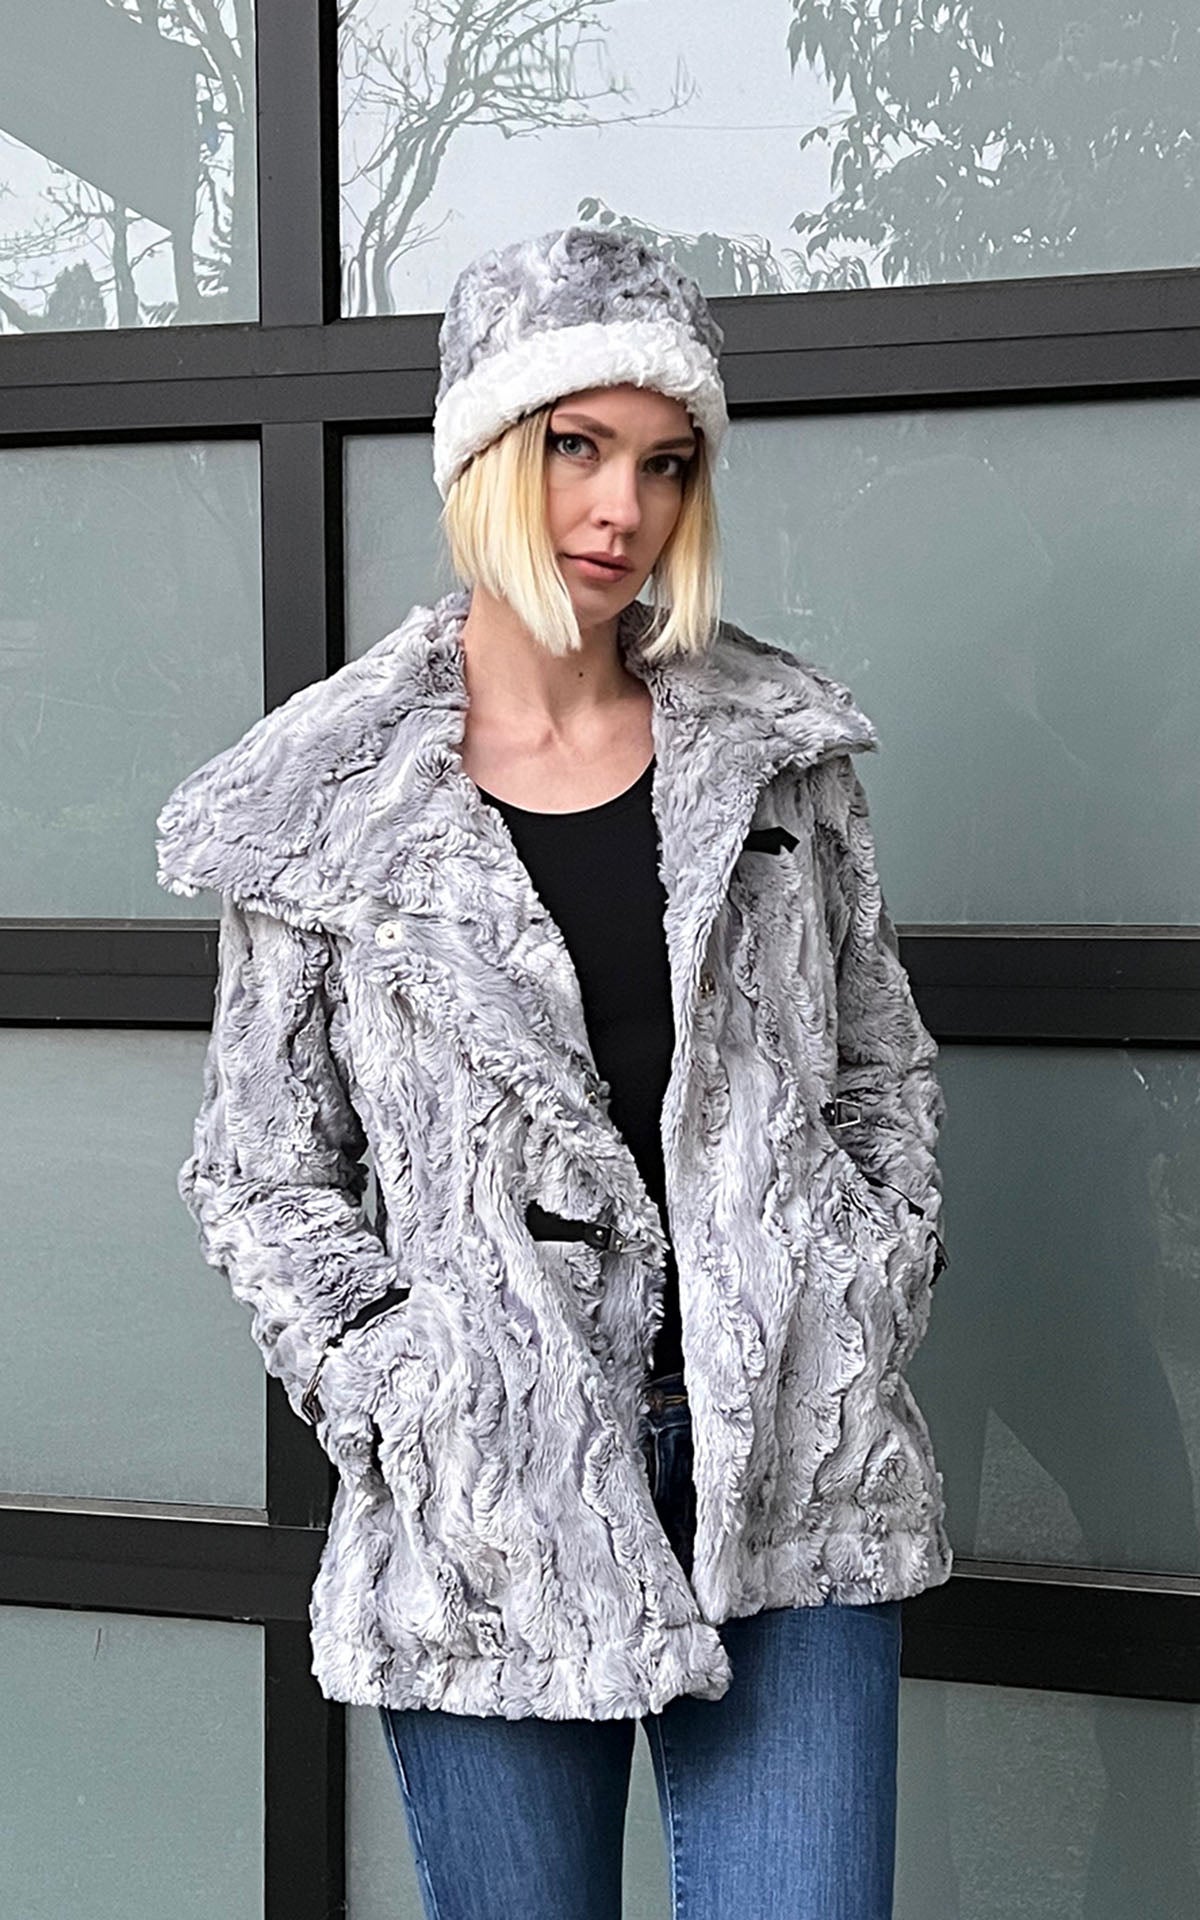 Model shown in  an open Dietrich Coat and matching Cuffed Pillbox | Winter River  bluish Gray with a hint of periwinkle Faux Fur Pea Coat | Featuring Buckle Clasps | Handmade in Seattle, WA | Pandemonium Millinery